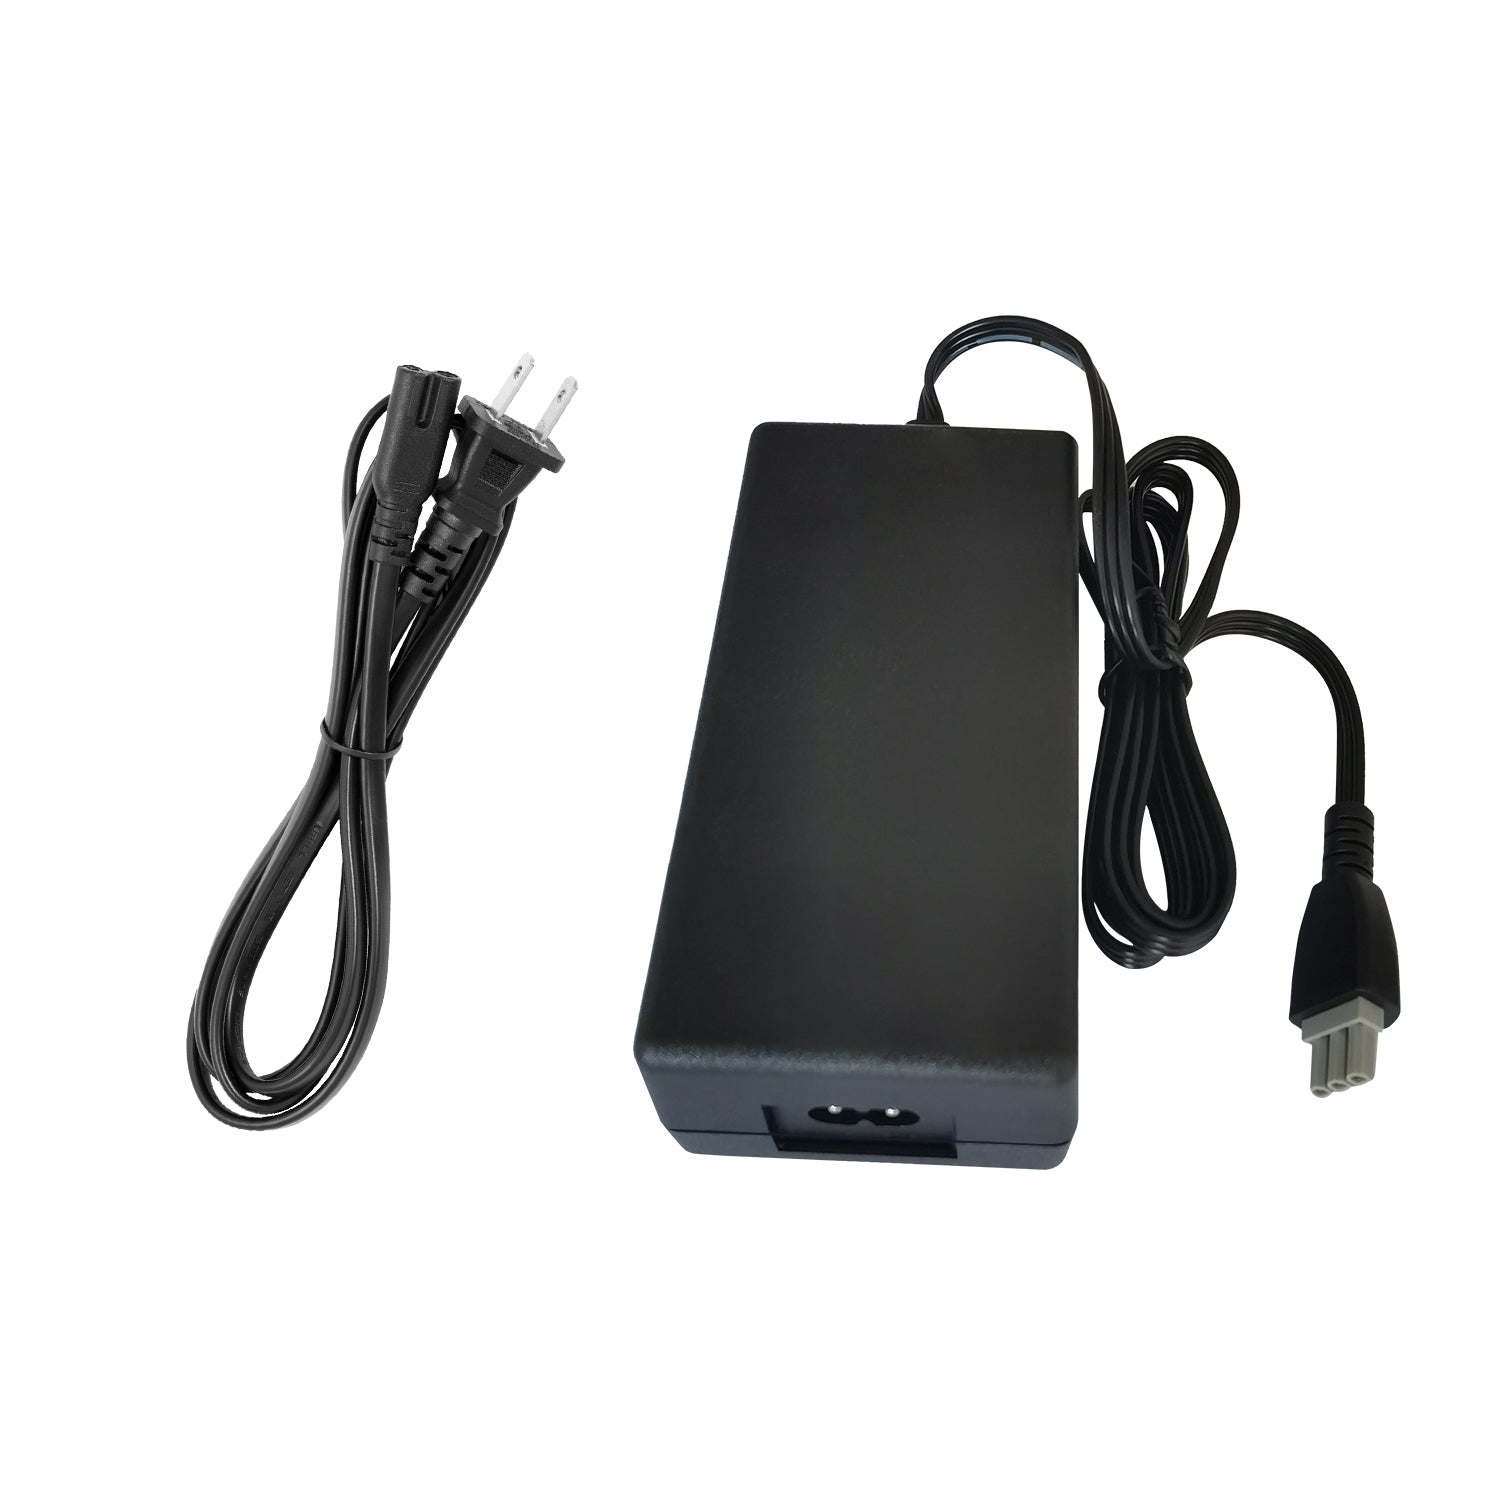 Power Adapter for hp psc q5765a Printer.